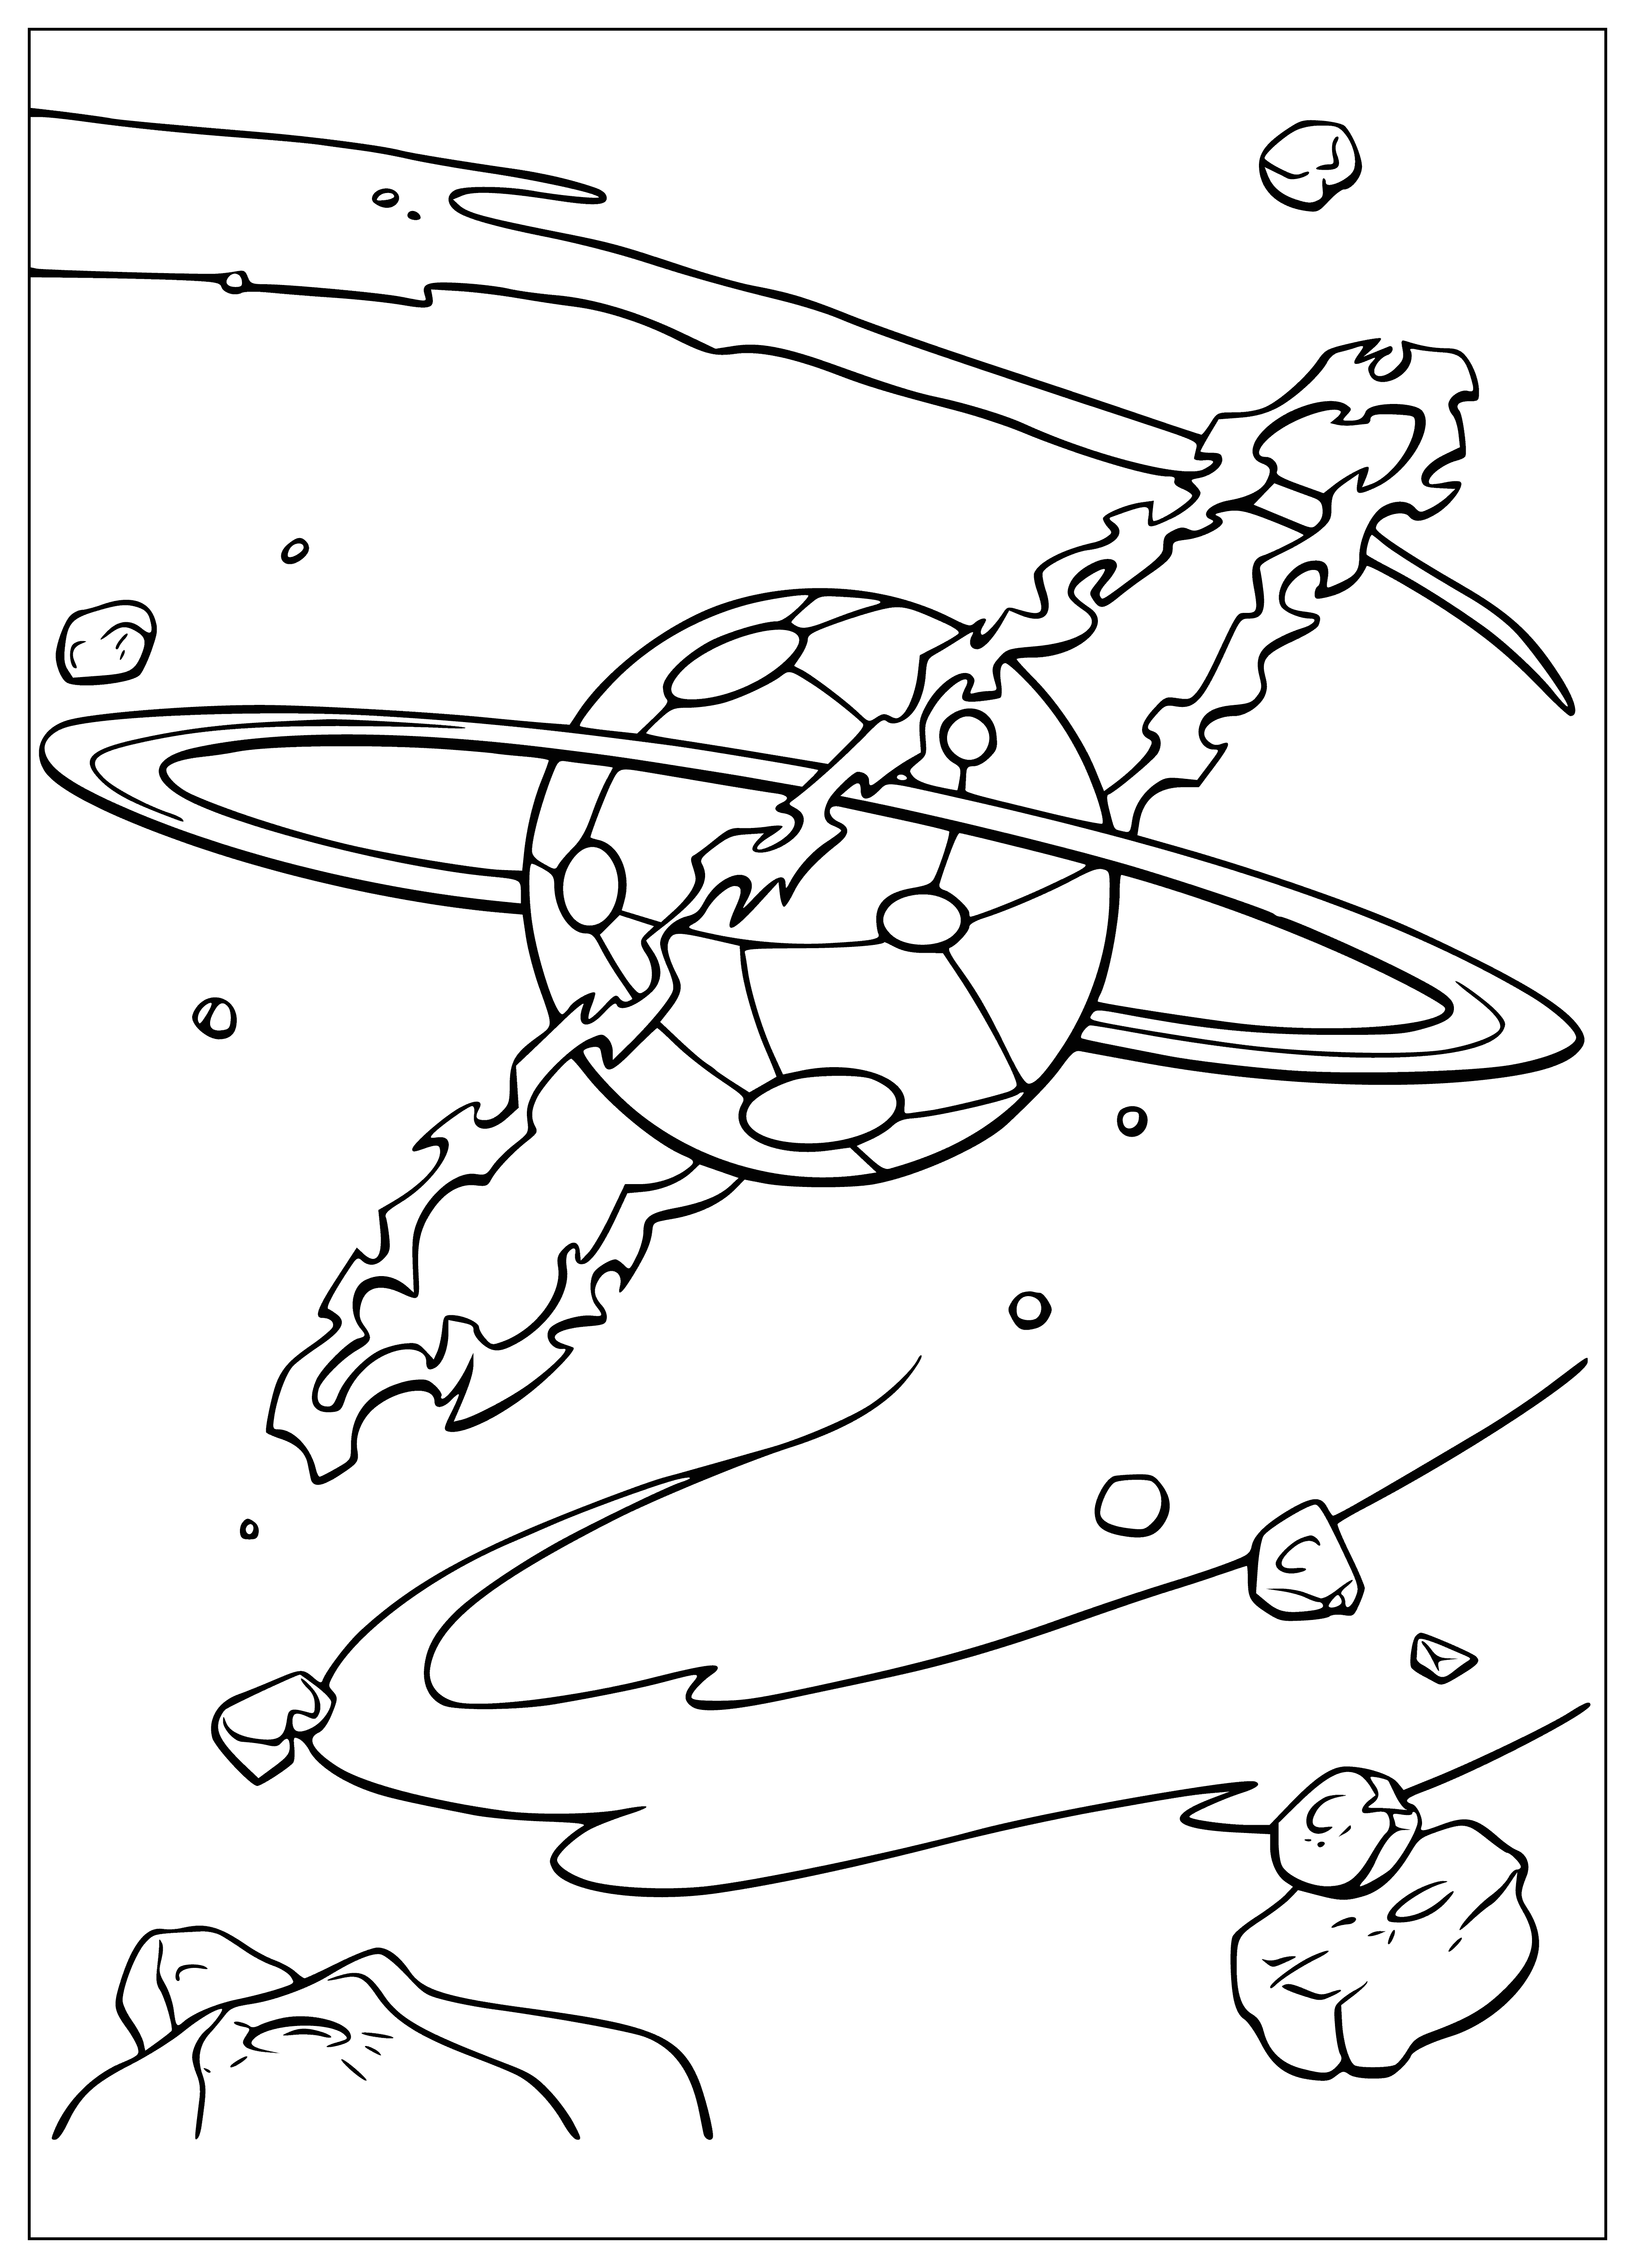 coloring page: Coloring page of a big treasure planet surrounded by smaller planets and stars, with a chest full of gold and jewels. #treasureplanet